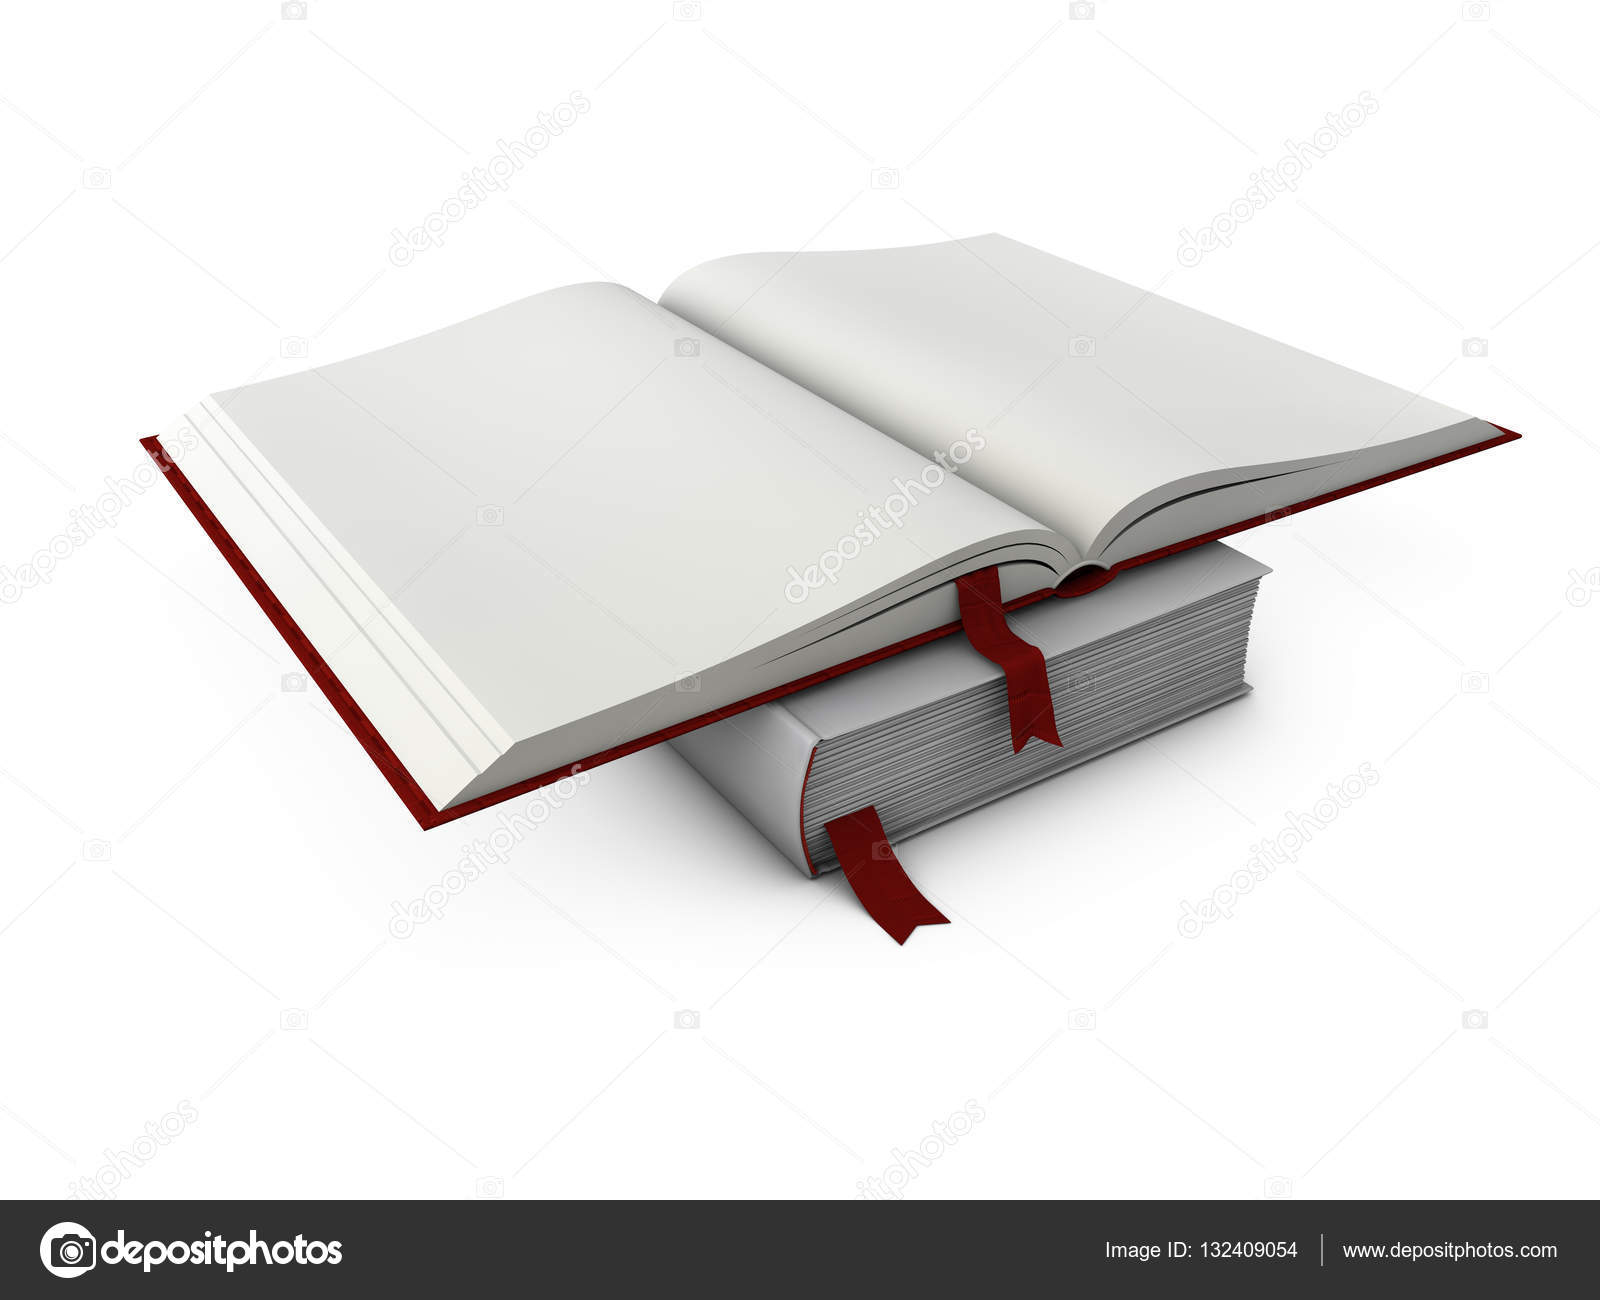 depositphotos 132409054-stock-photo-illustration-of-blank-book-cover